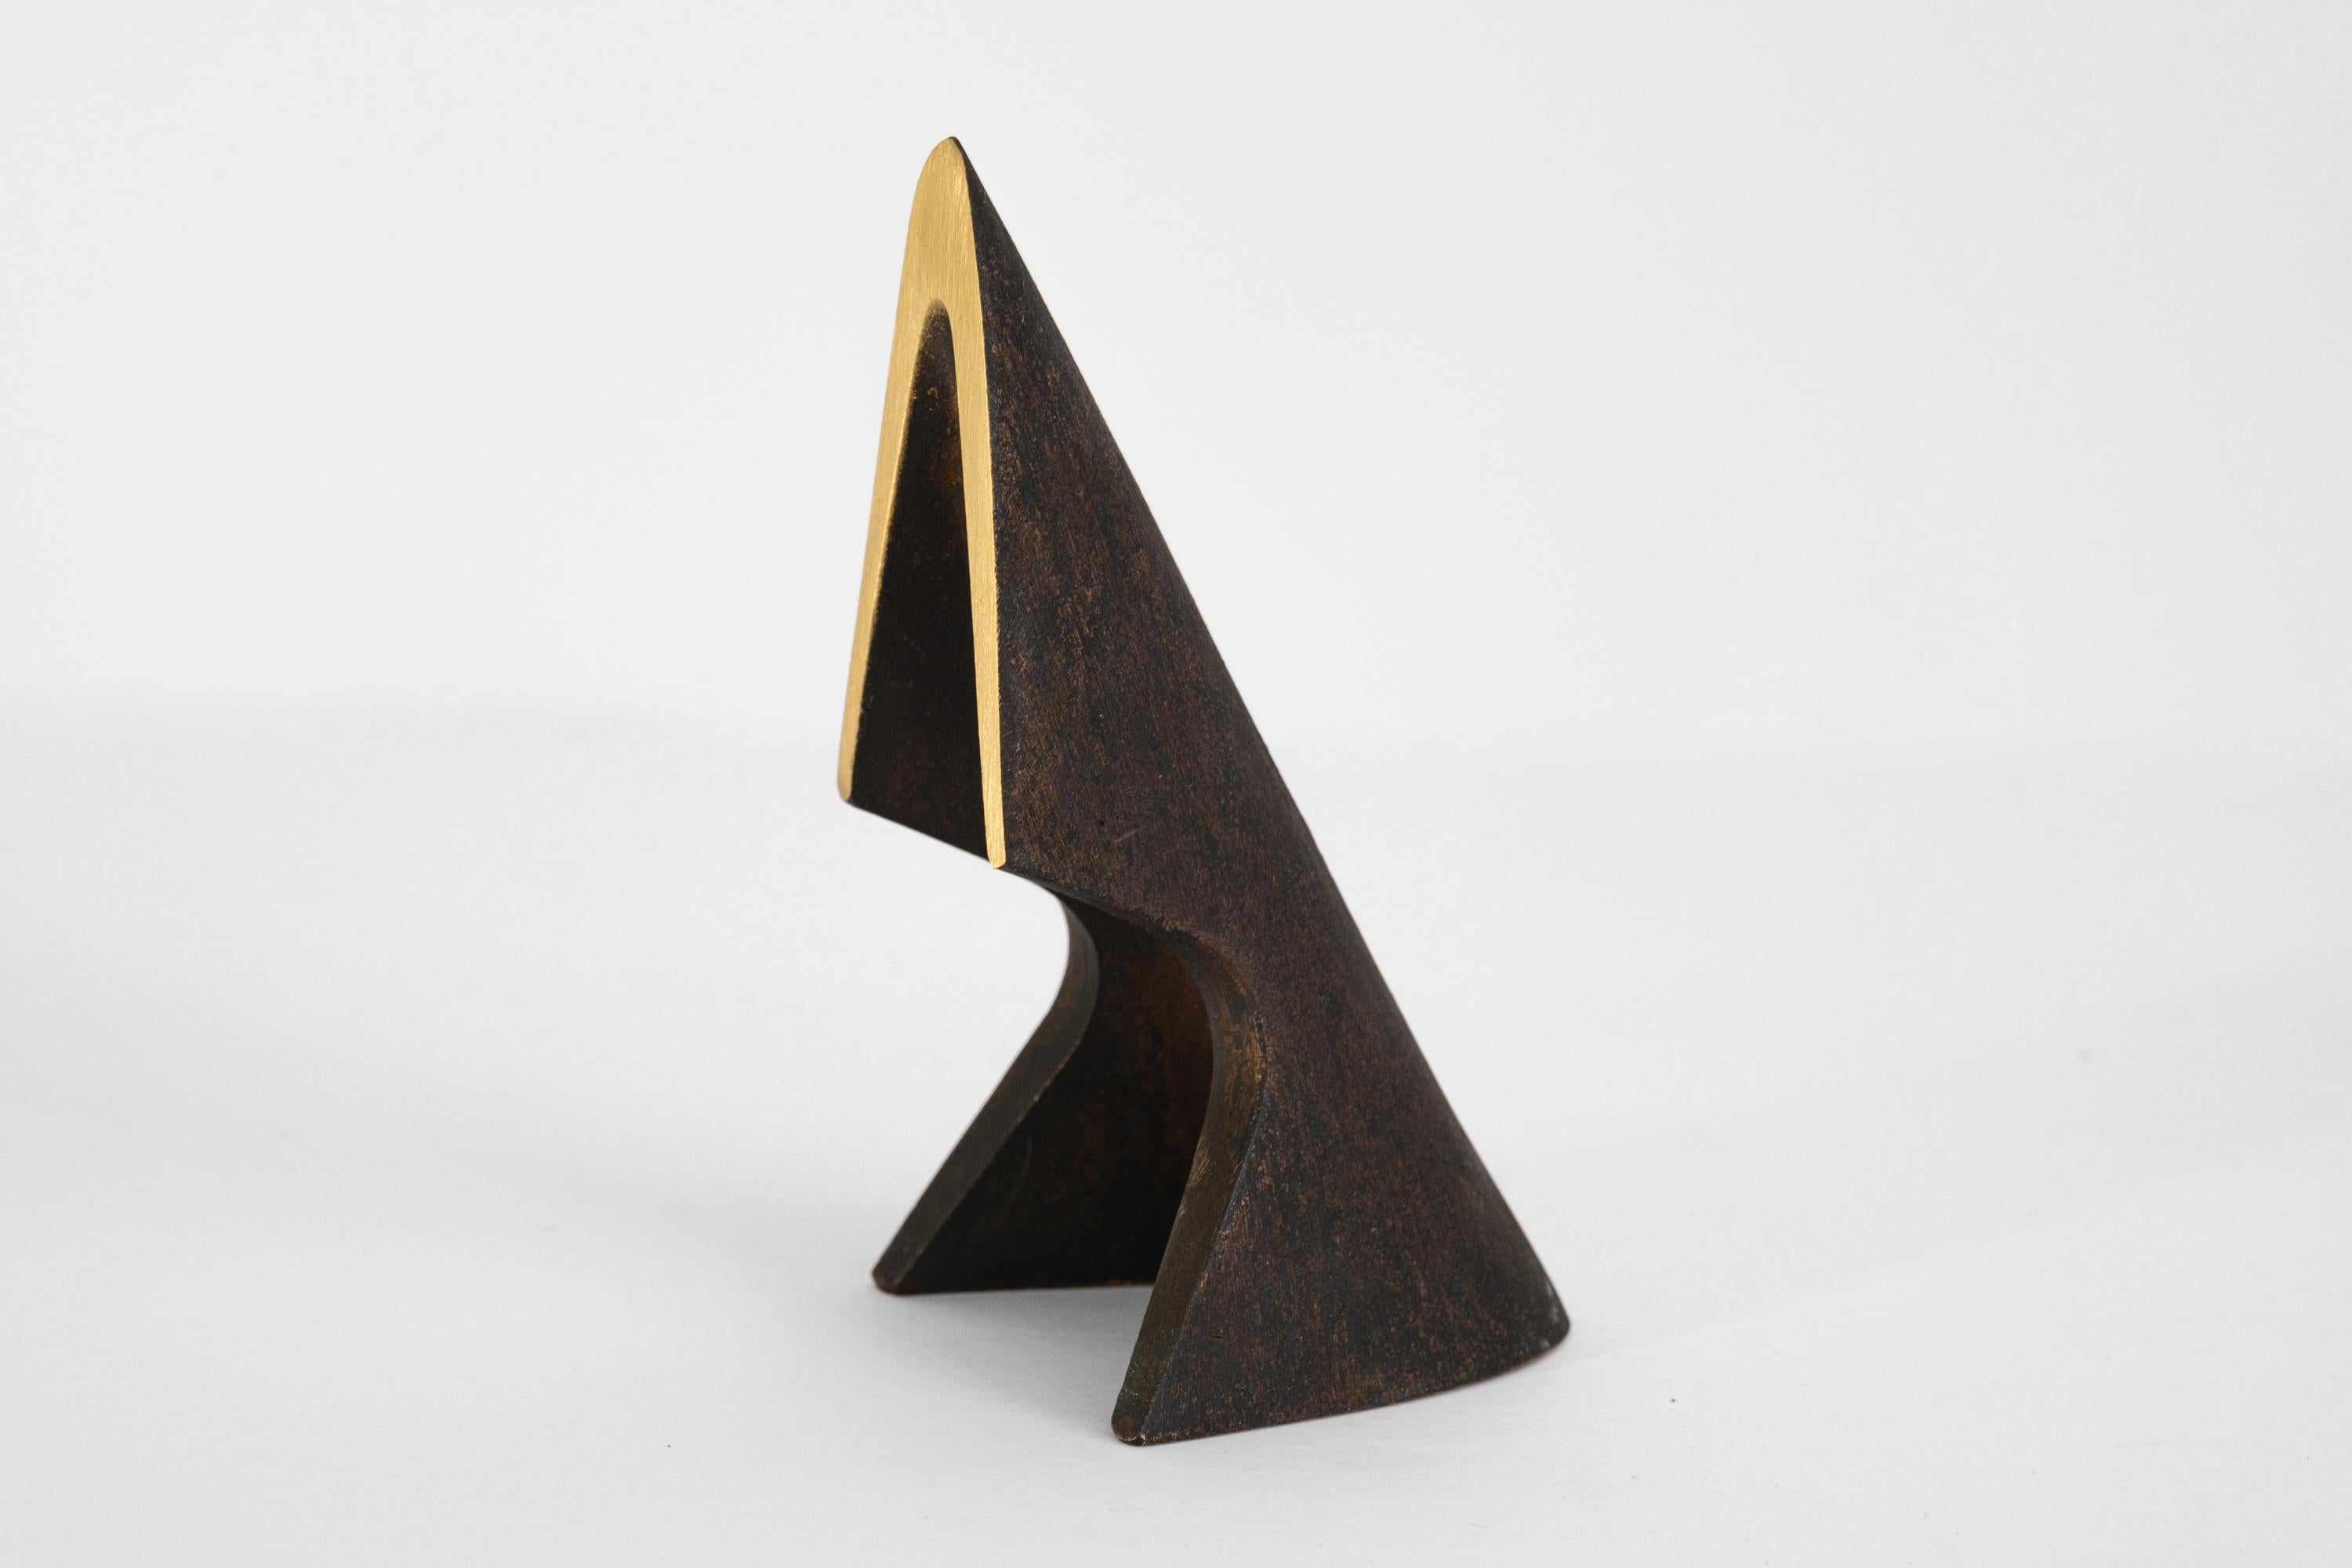 Pair of Carl Auböck Model #4099 patinated brass bookends. Designed in the 1950s, this incredibly refined and sculptural pair of bookends are executed in patinated and polished brass.

Produced by Carl Auböck IV in the original Auböck Werkstätte in